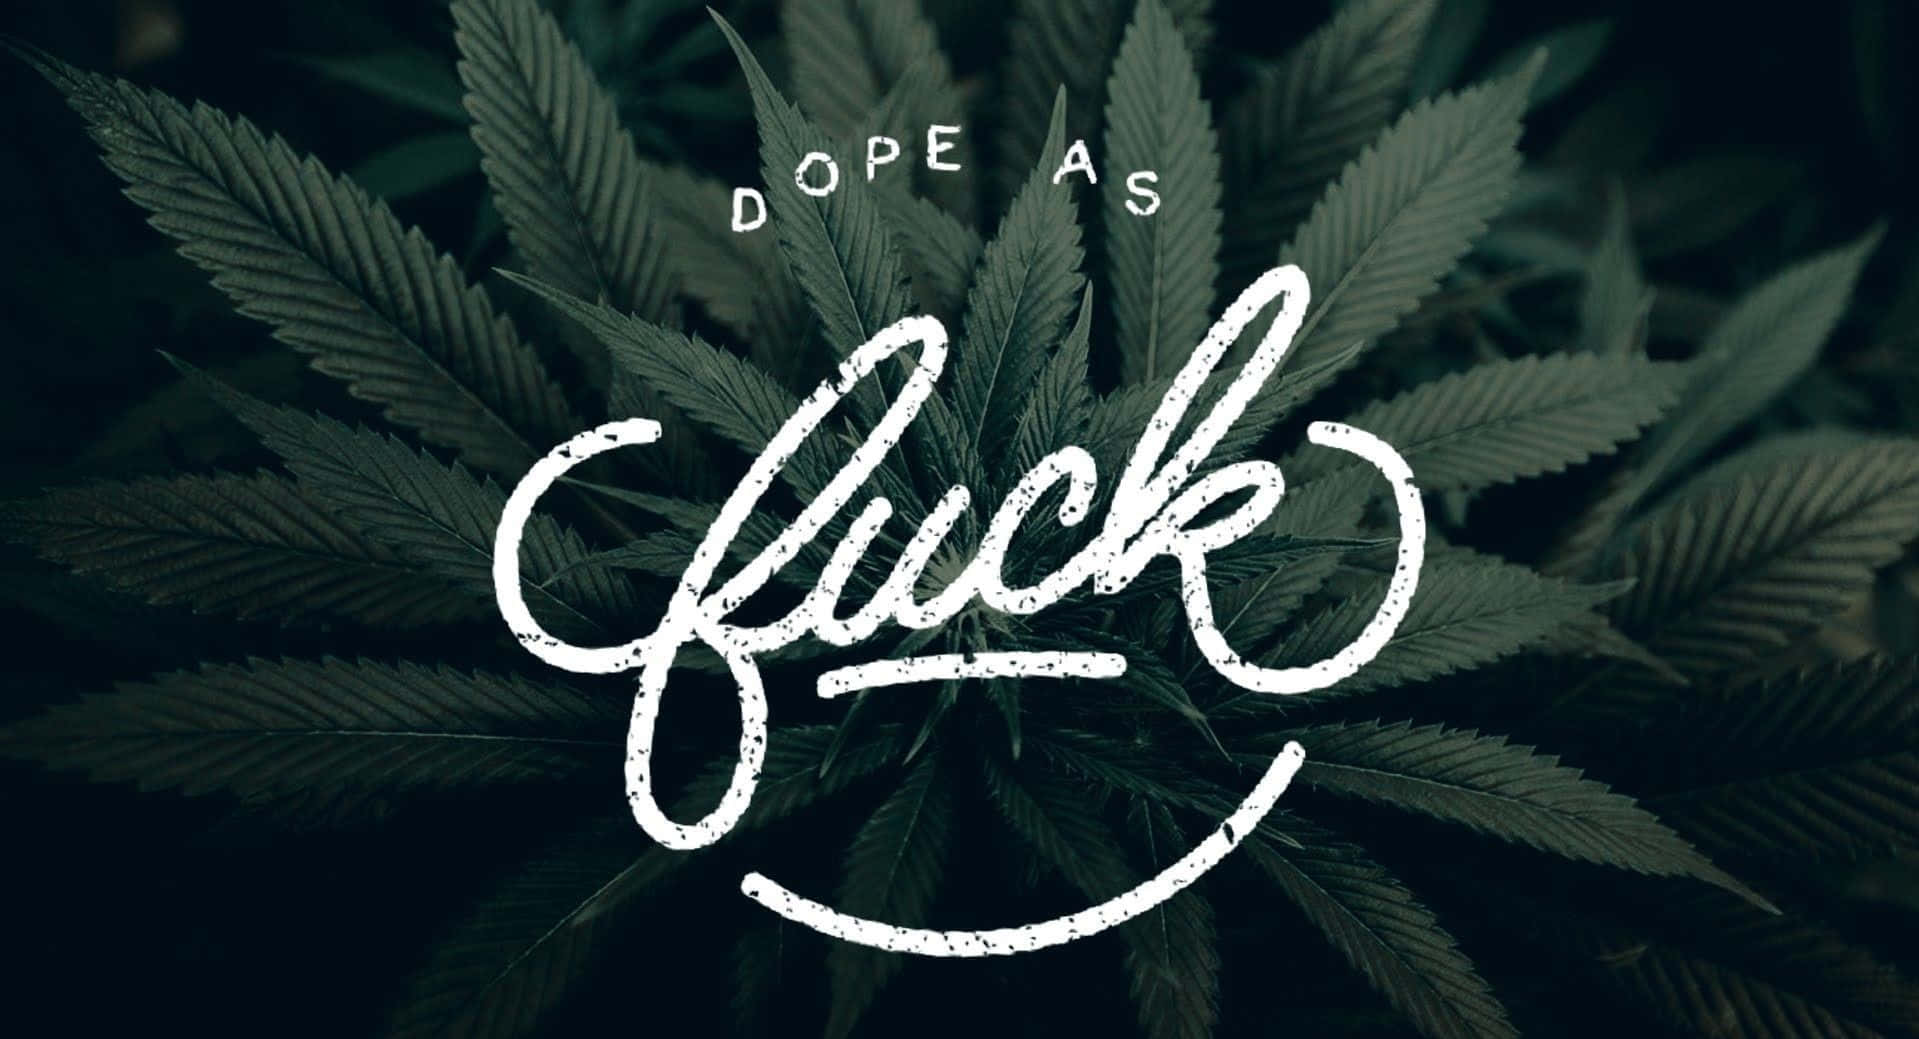 Dope As Fuck - A Logo With Marijuana Leaves Wallpaper